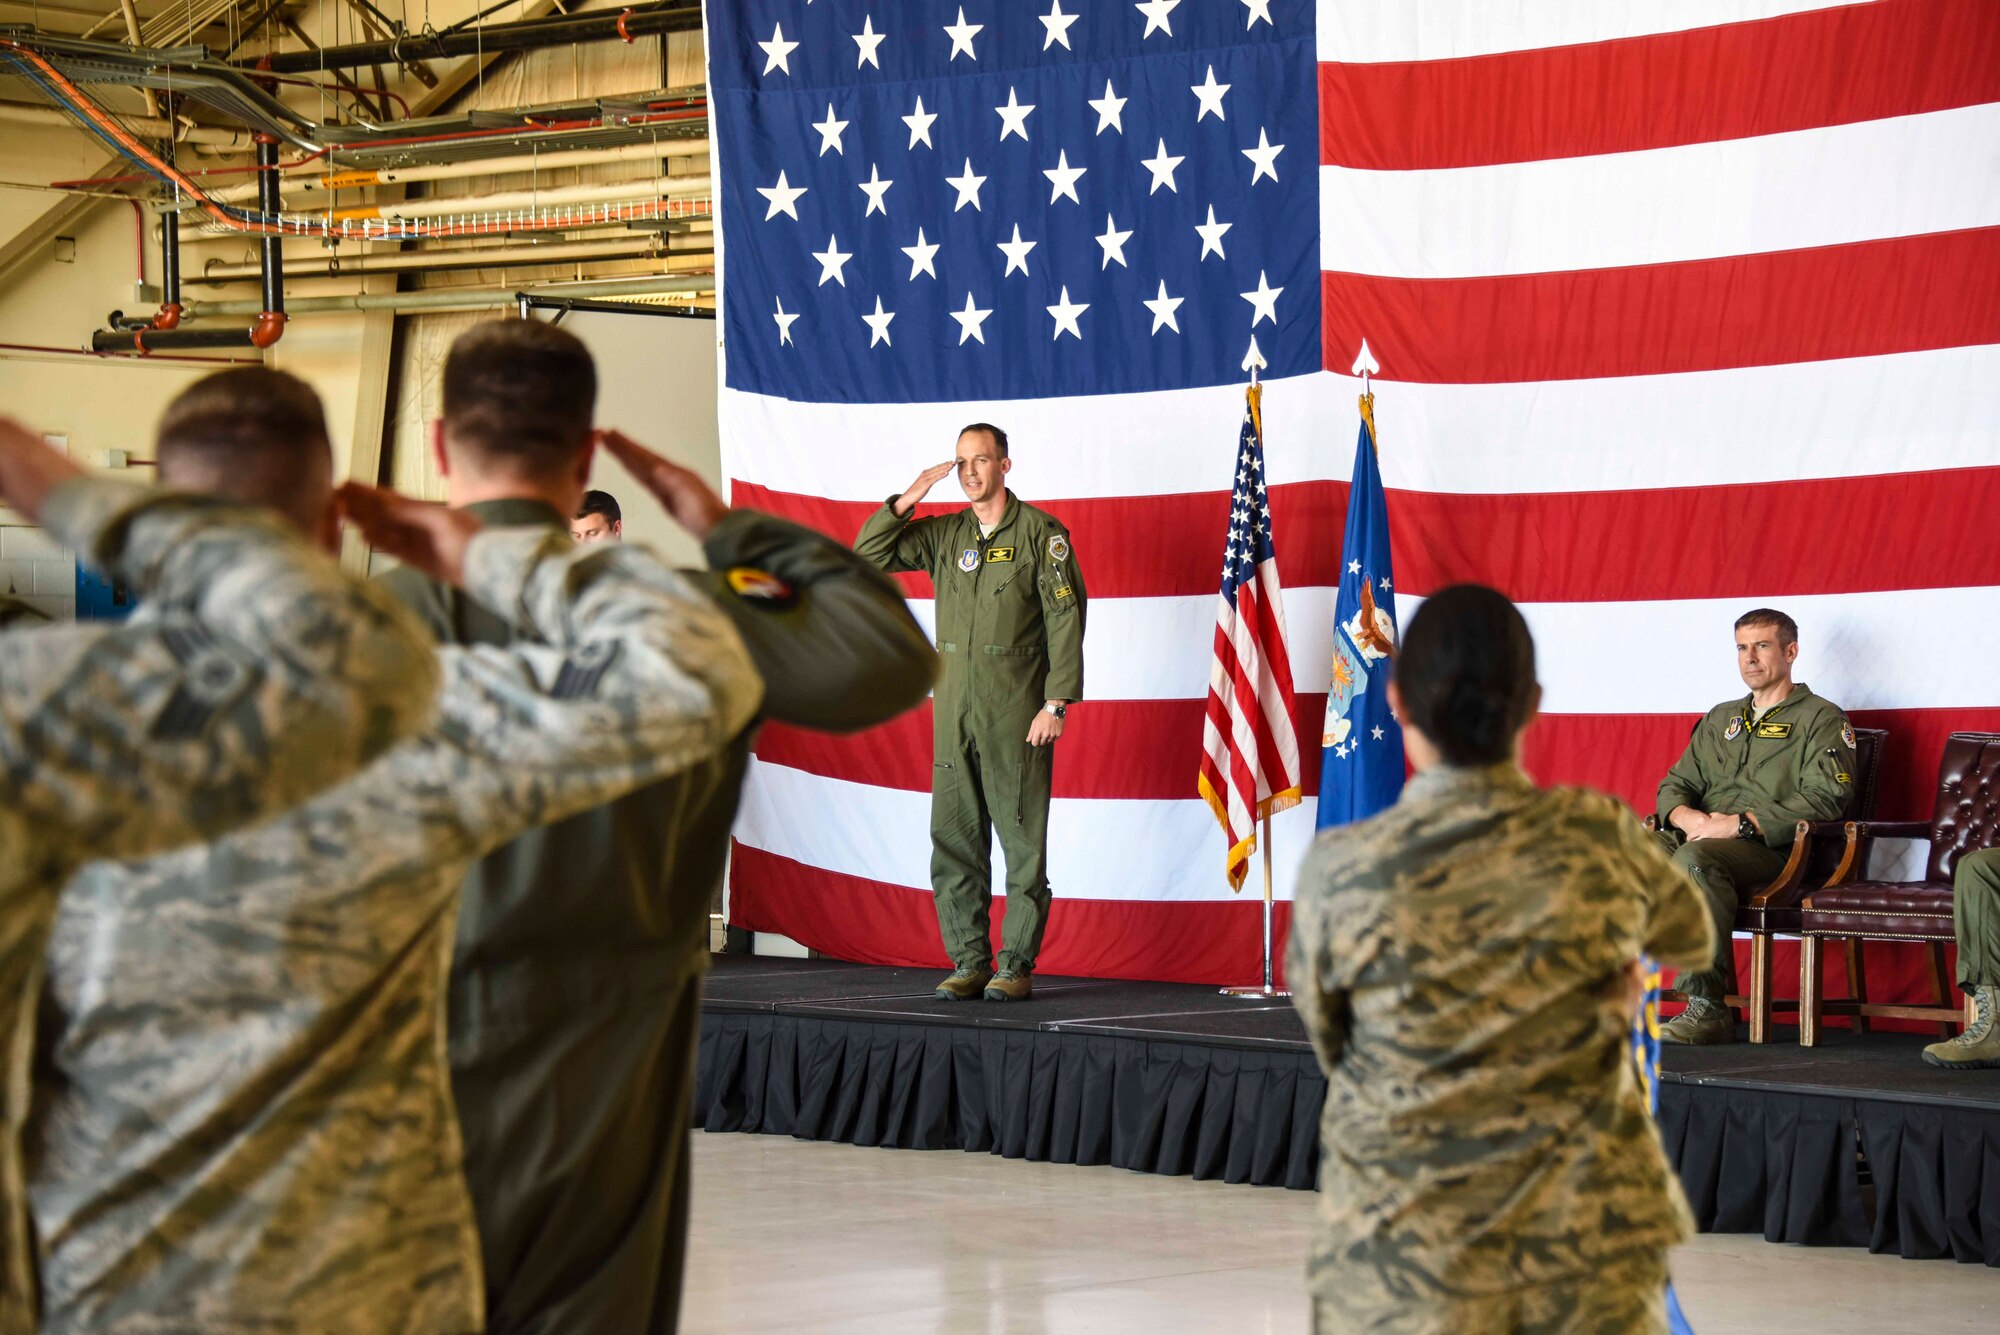 Lt. Col. Benjamin Harrison receives his first salute as commander from members of the 466th Fighter Squadron